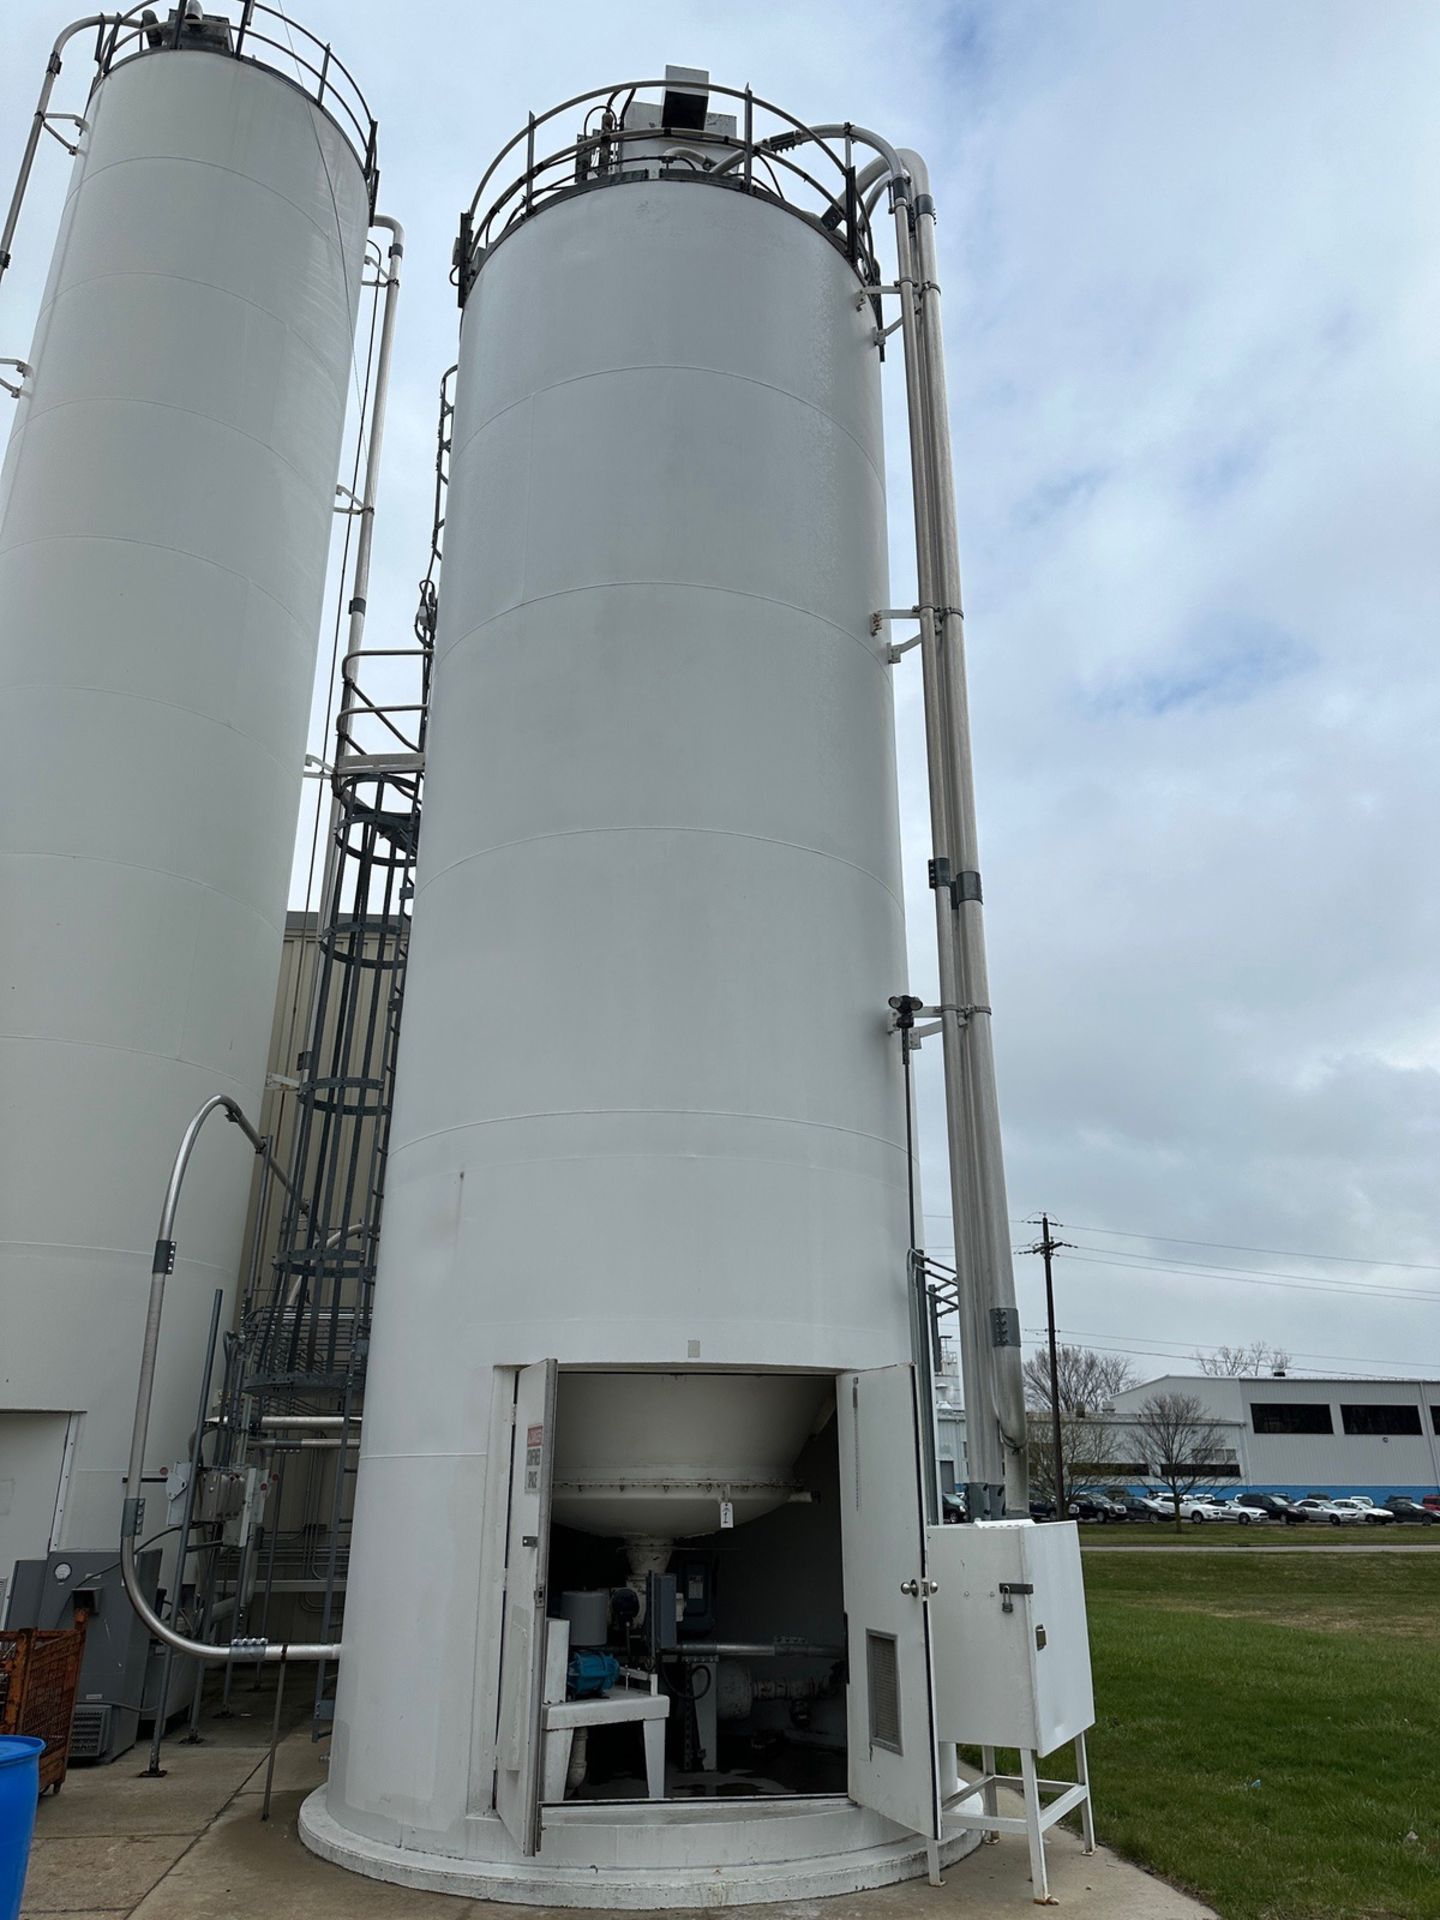 Peabody TecTank 2,870 Cuft Flour Silo, Approximate Dimensions: 36' Height, 2 | Rig Fee $6500 (Crane)